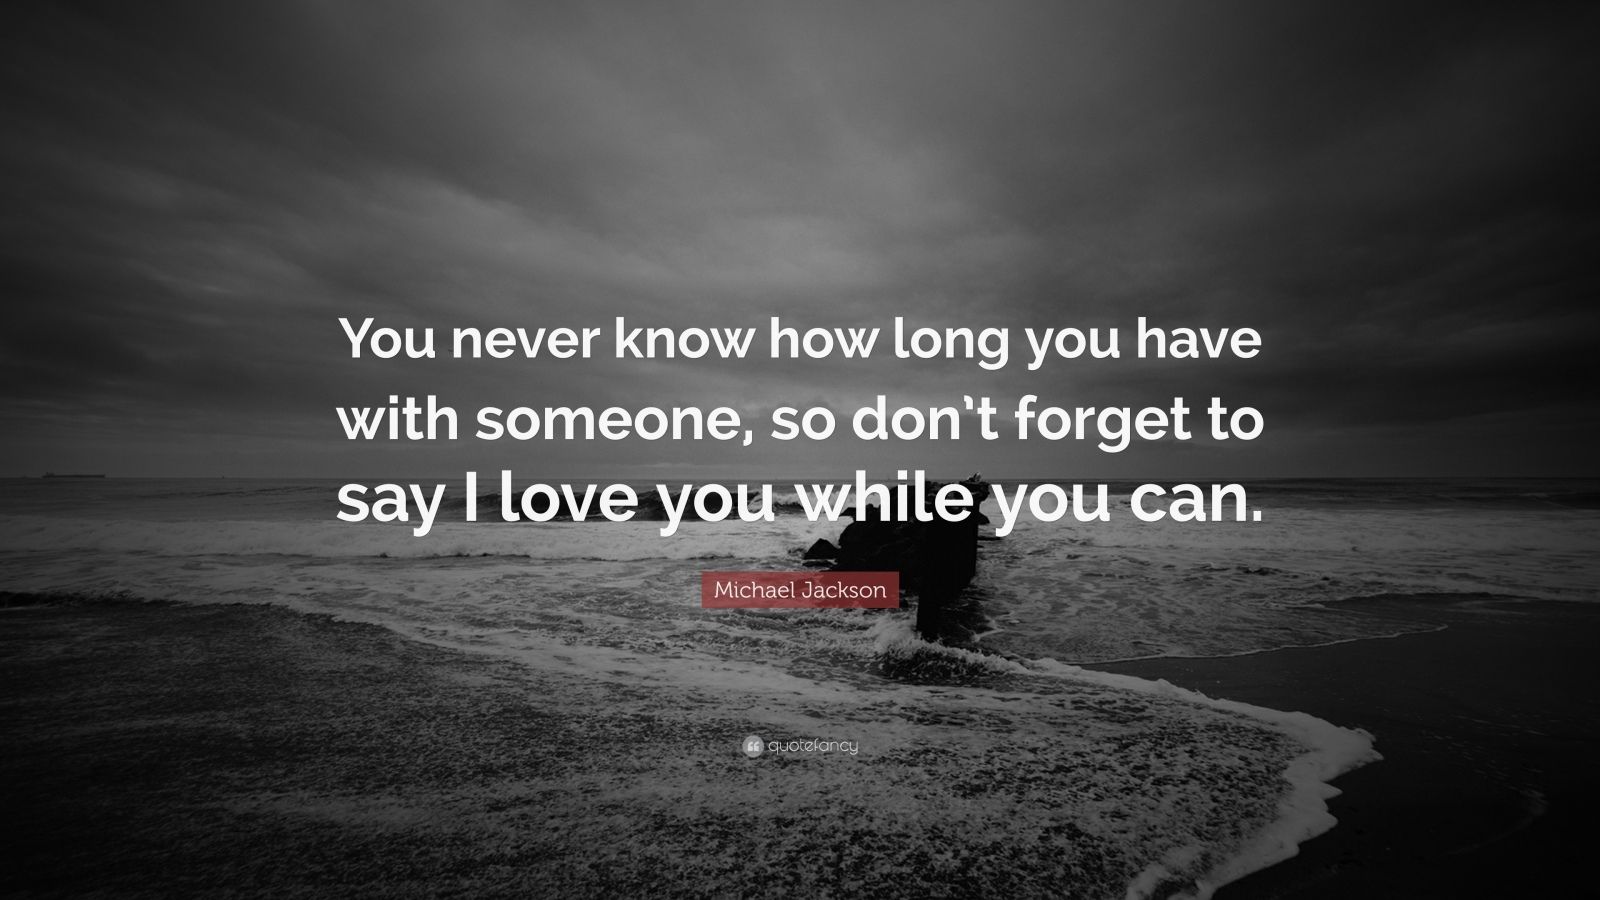 Michael Jackson Quote: “You never know how long you have with someone